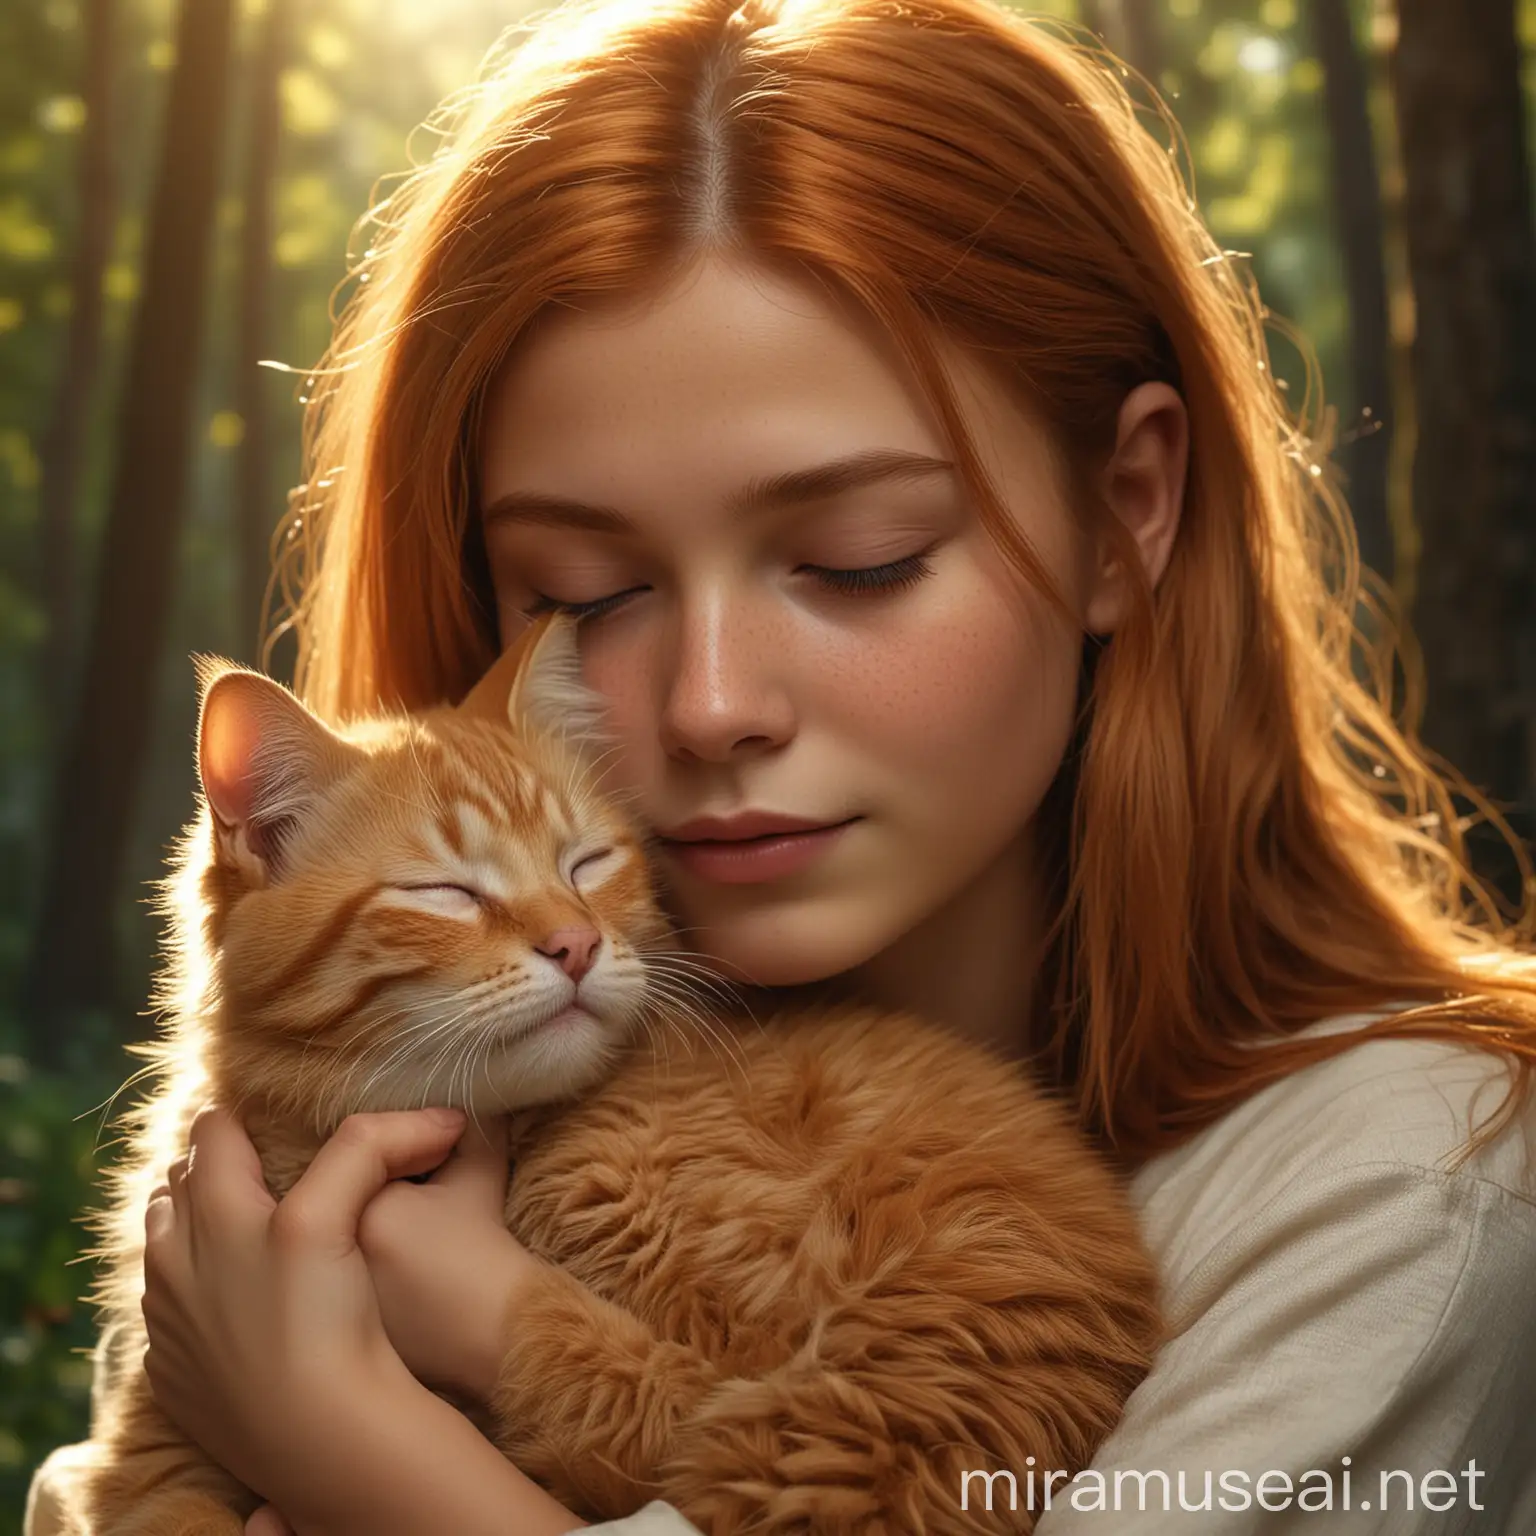 Trusting Bond Young Girl Holding Ginger Cat in Enchanting Woods